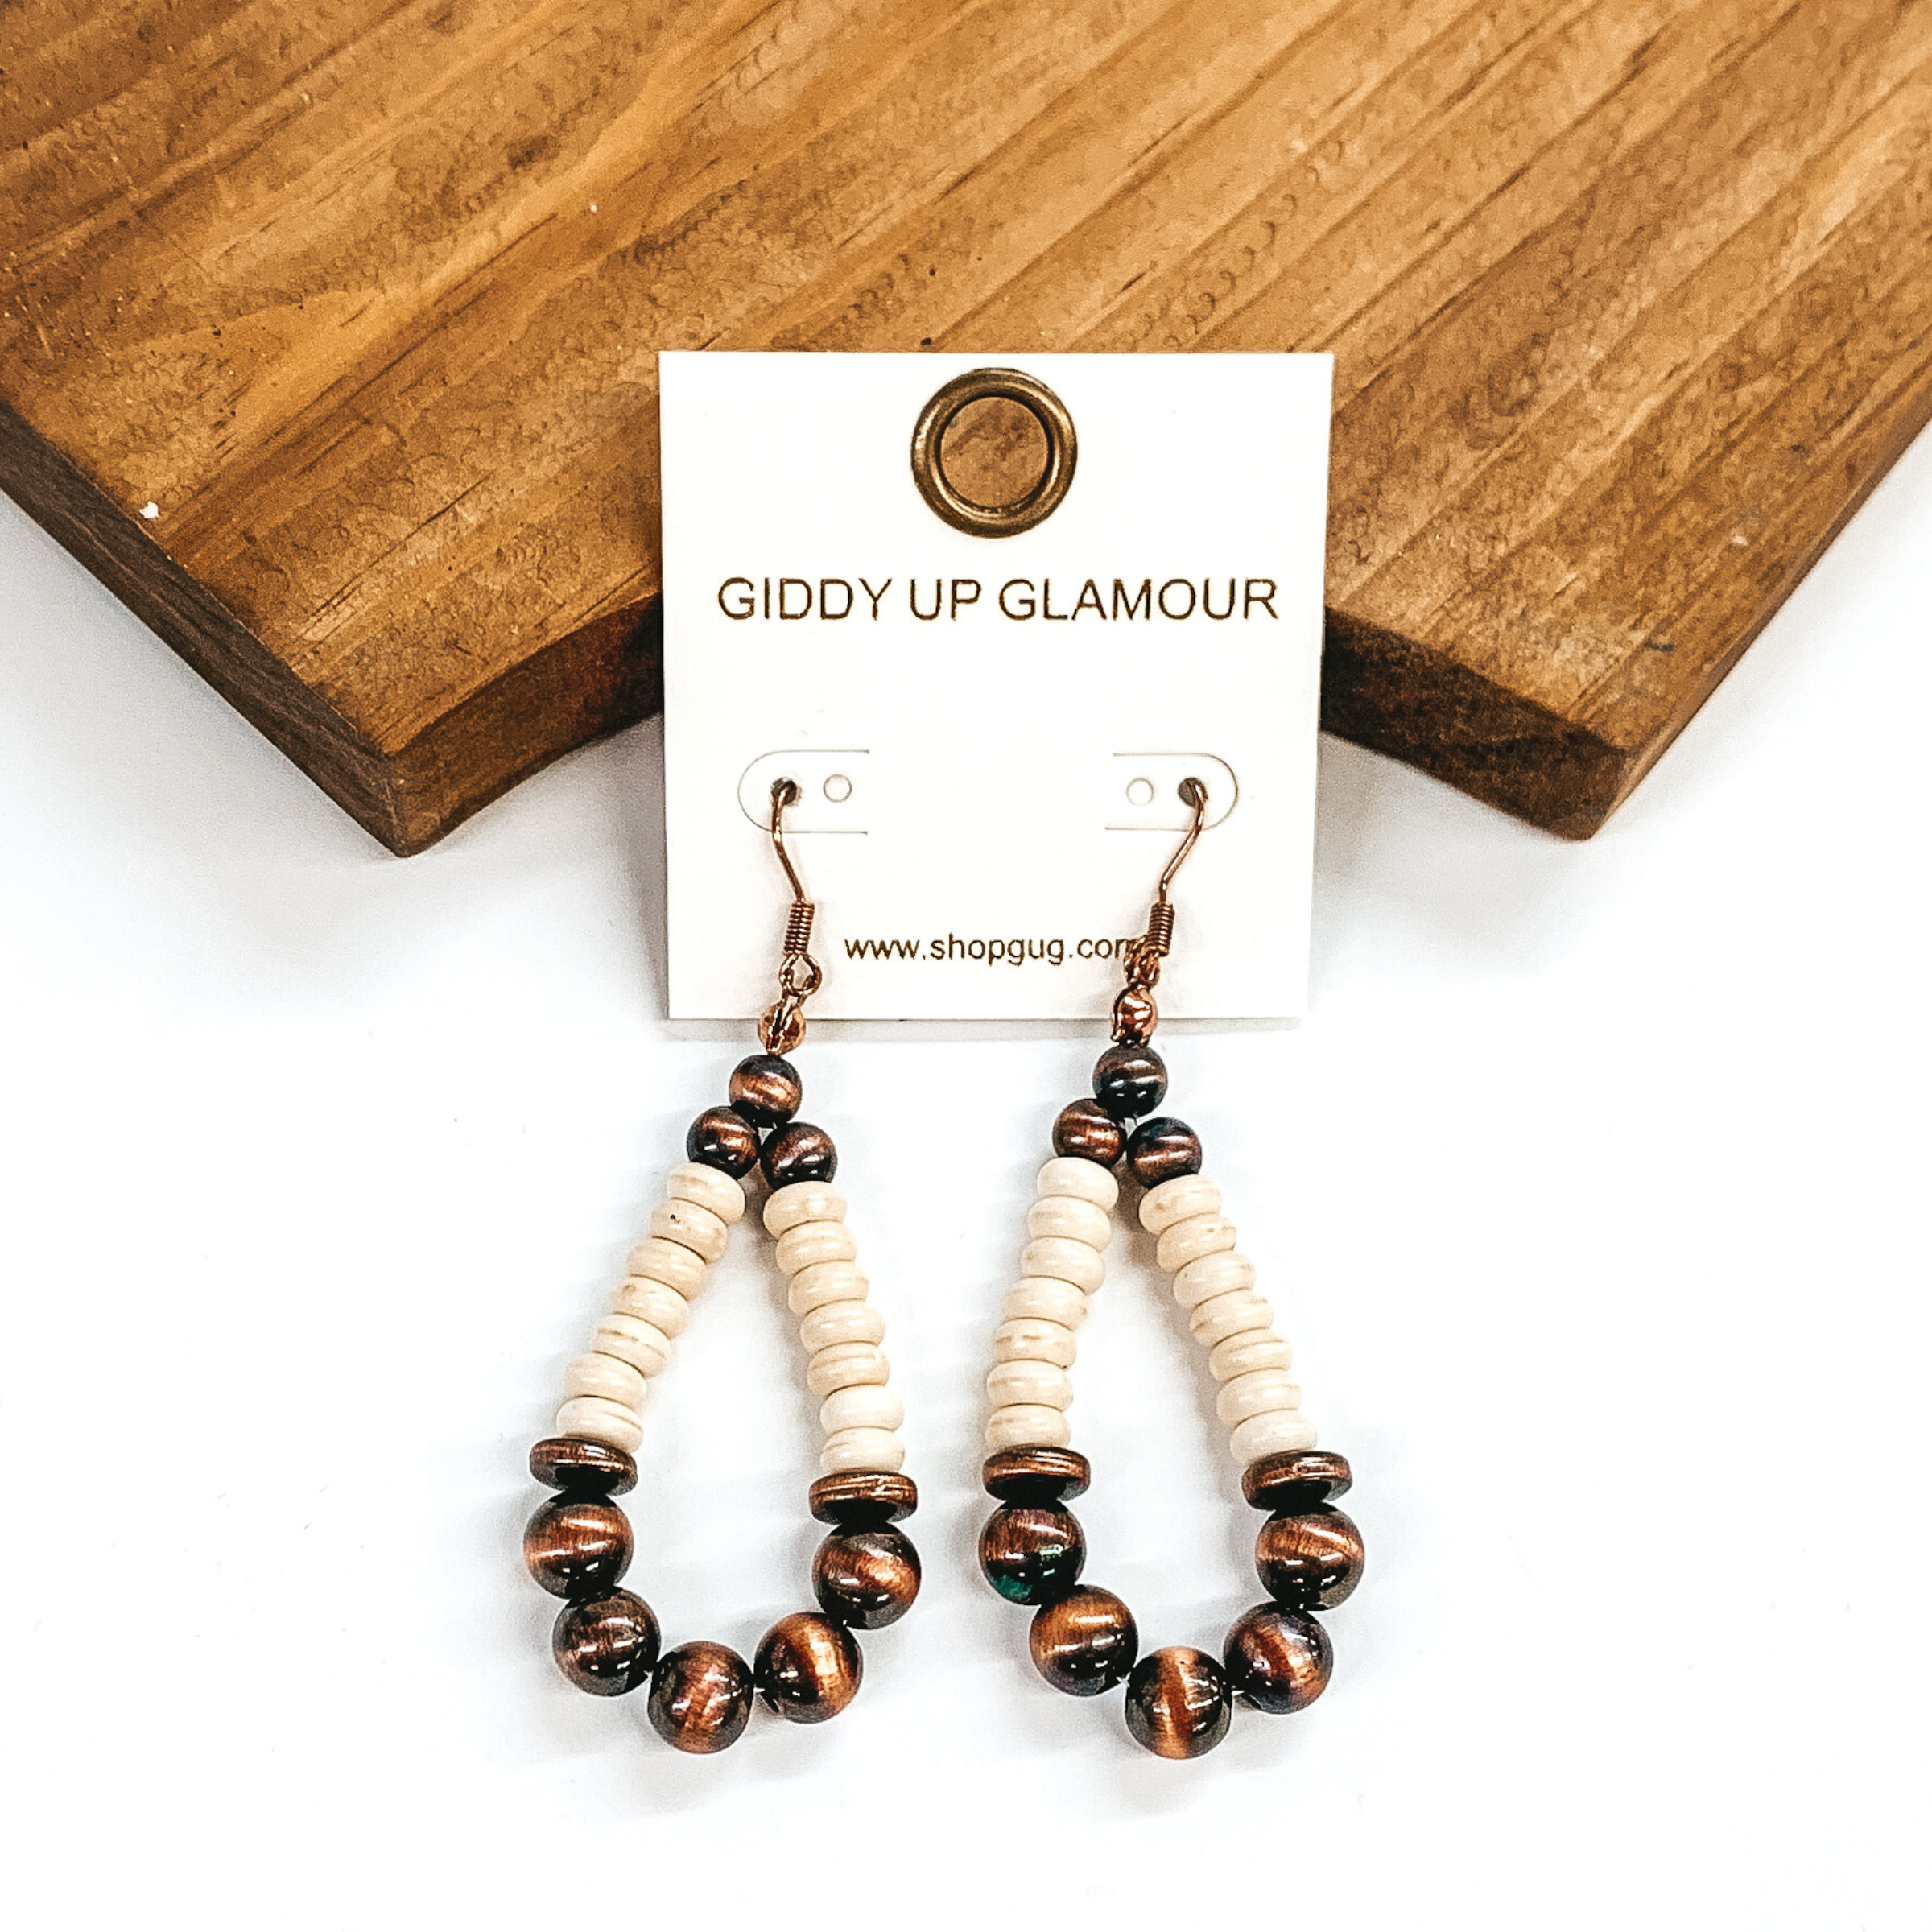 Teardrop beaded earrings. These earrings have a bottom and top section of copper beads that are separted by ivory beaded segments. These earrings are pictured in front of a brown block on a white background. 